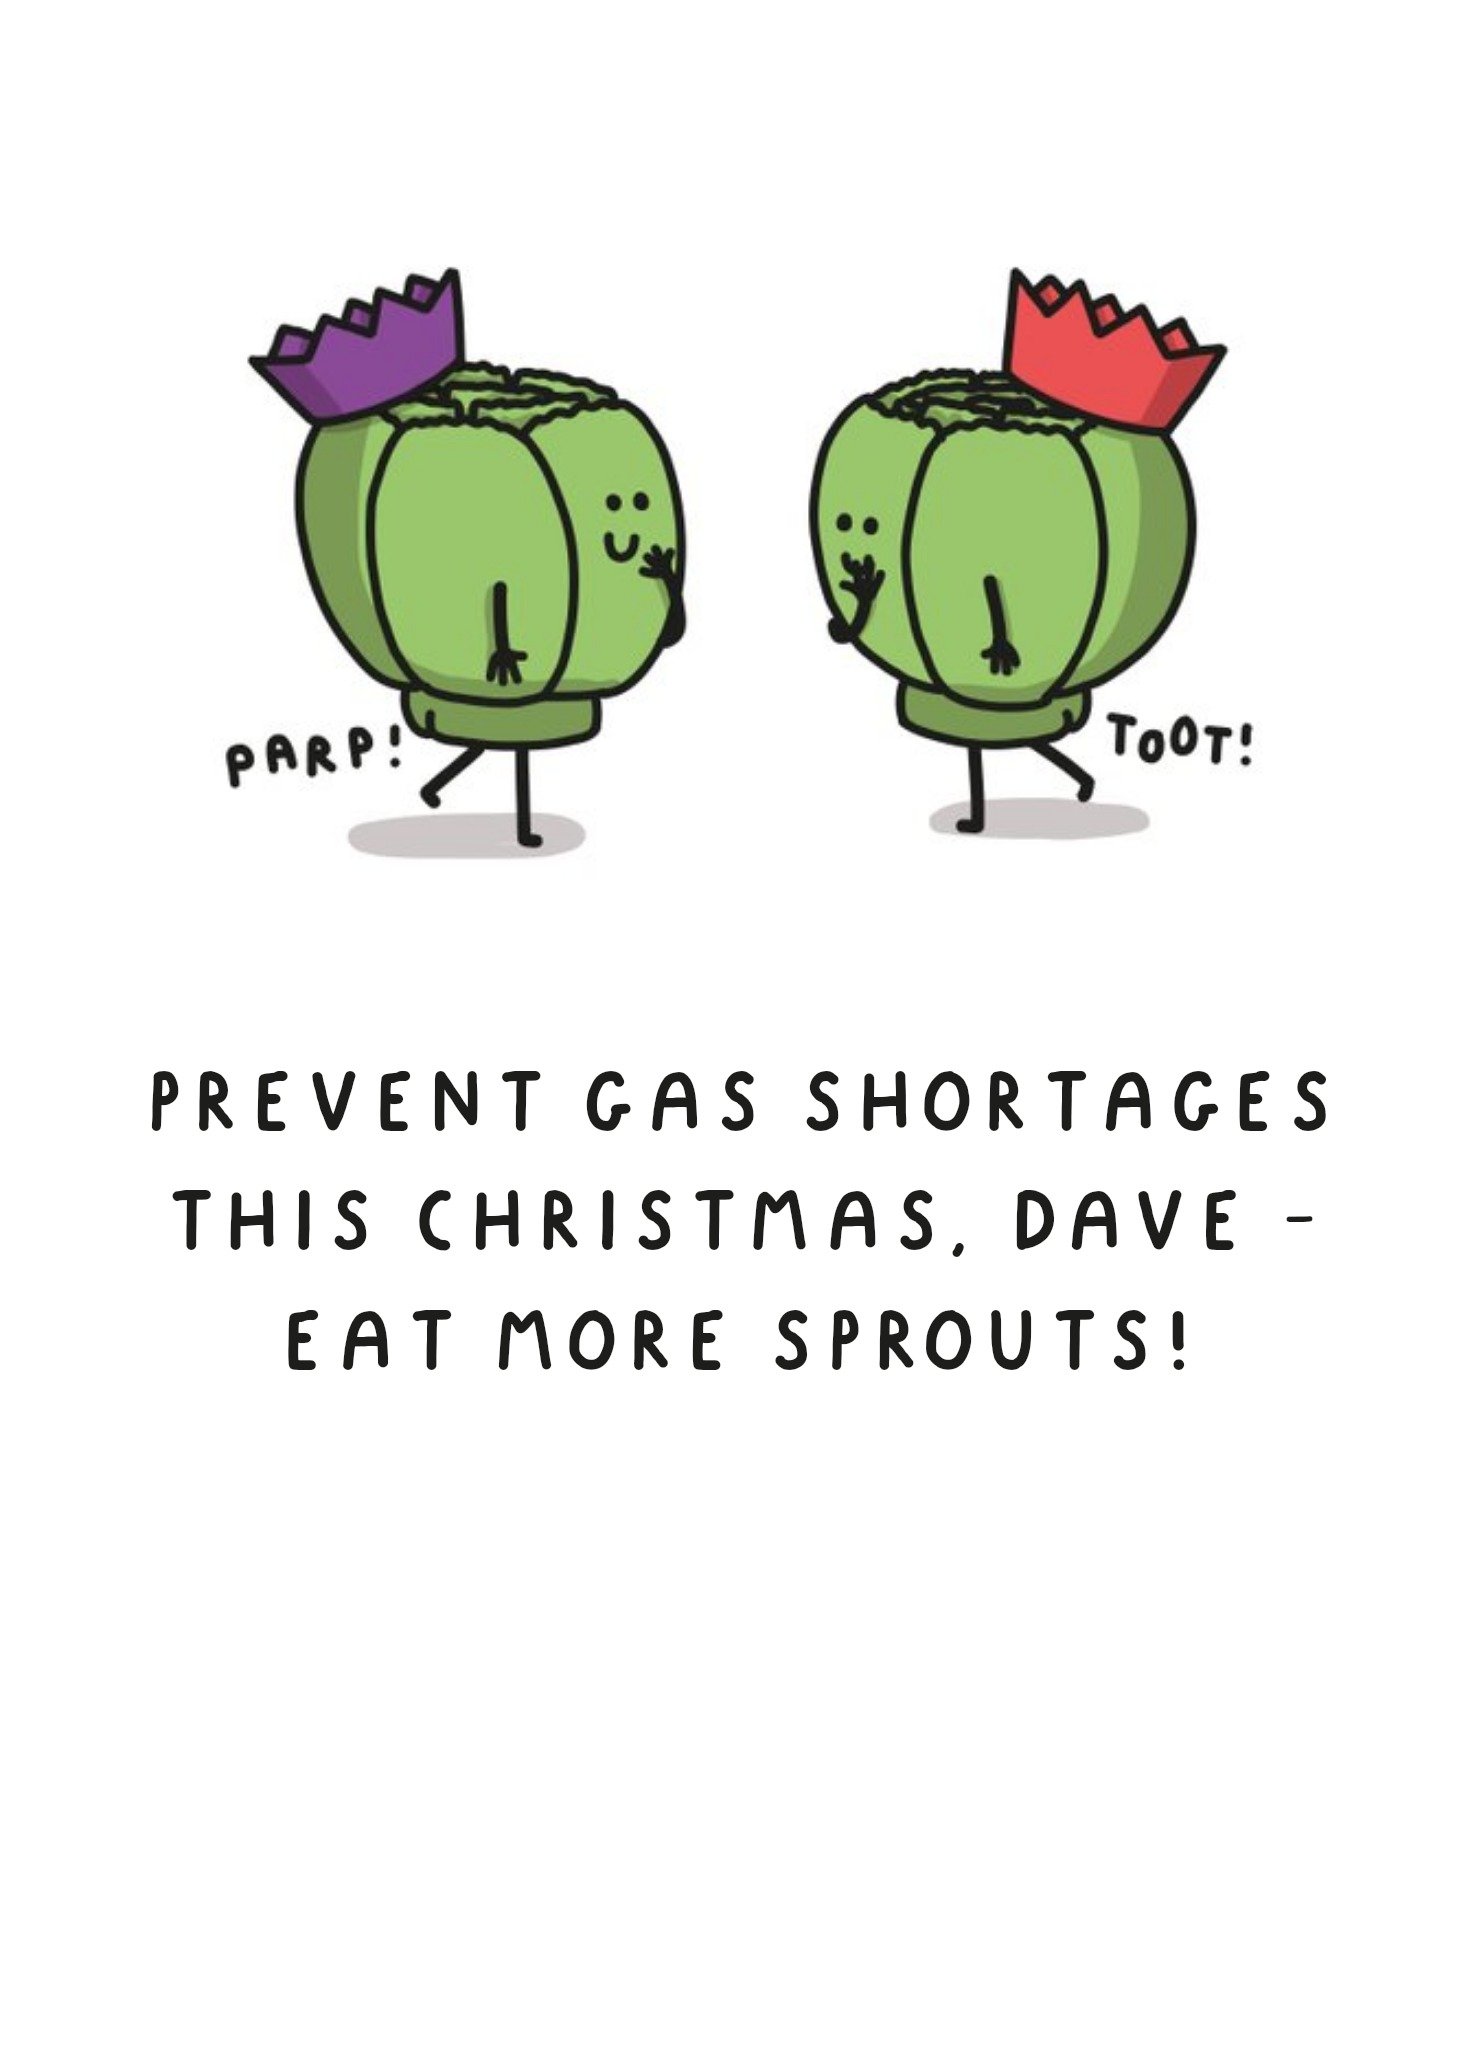 Moonpig Illustration Of Two Brussel Sprout Characters Humorous Christmas Card Ecard